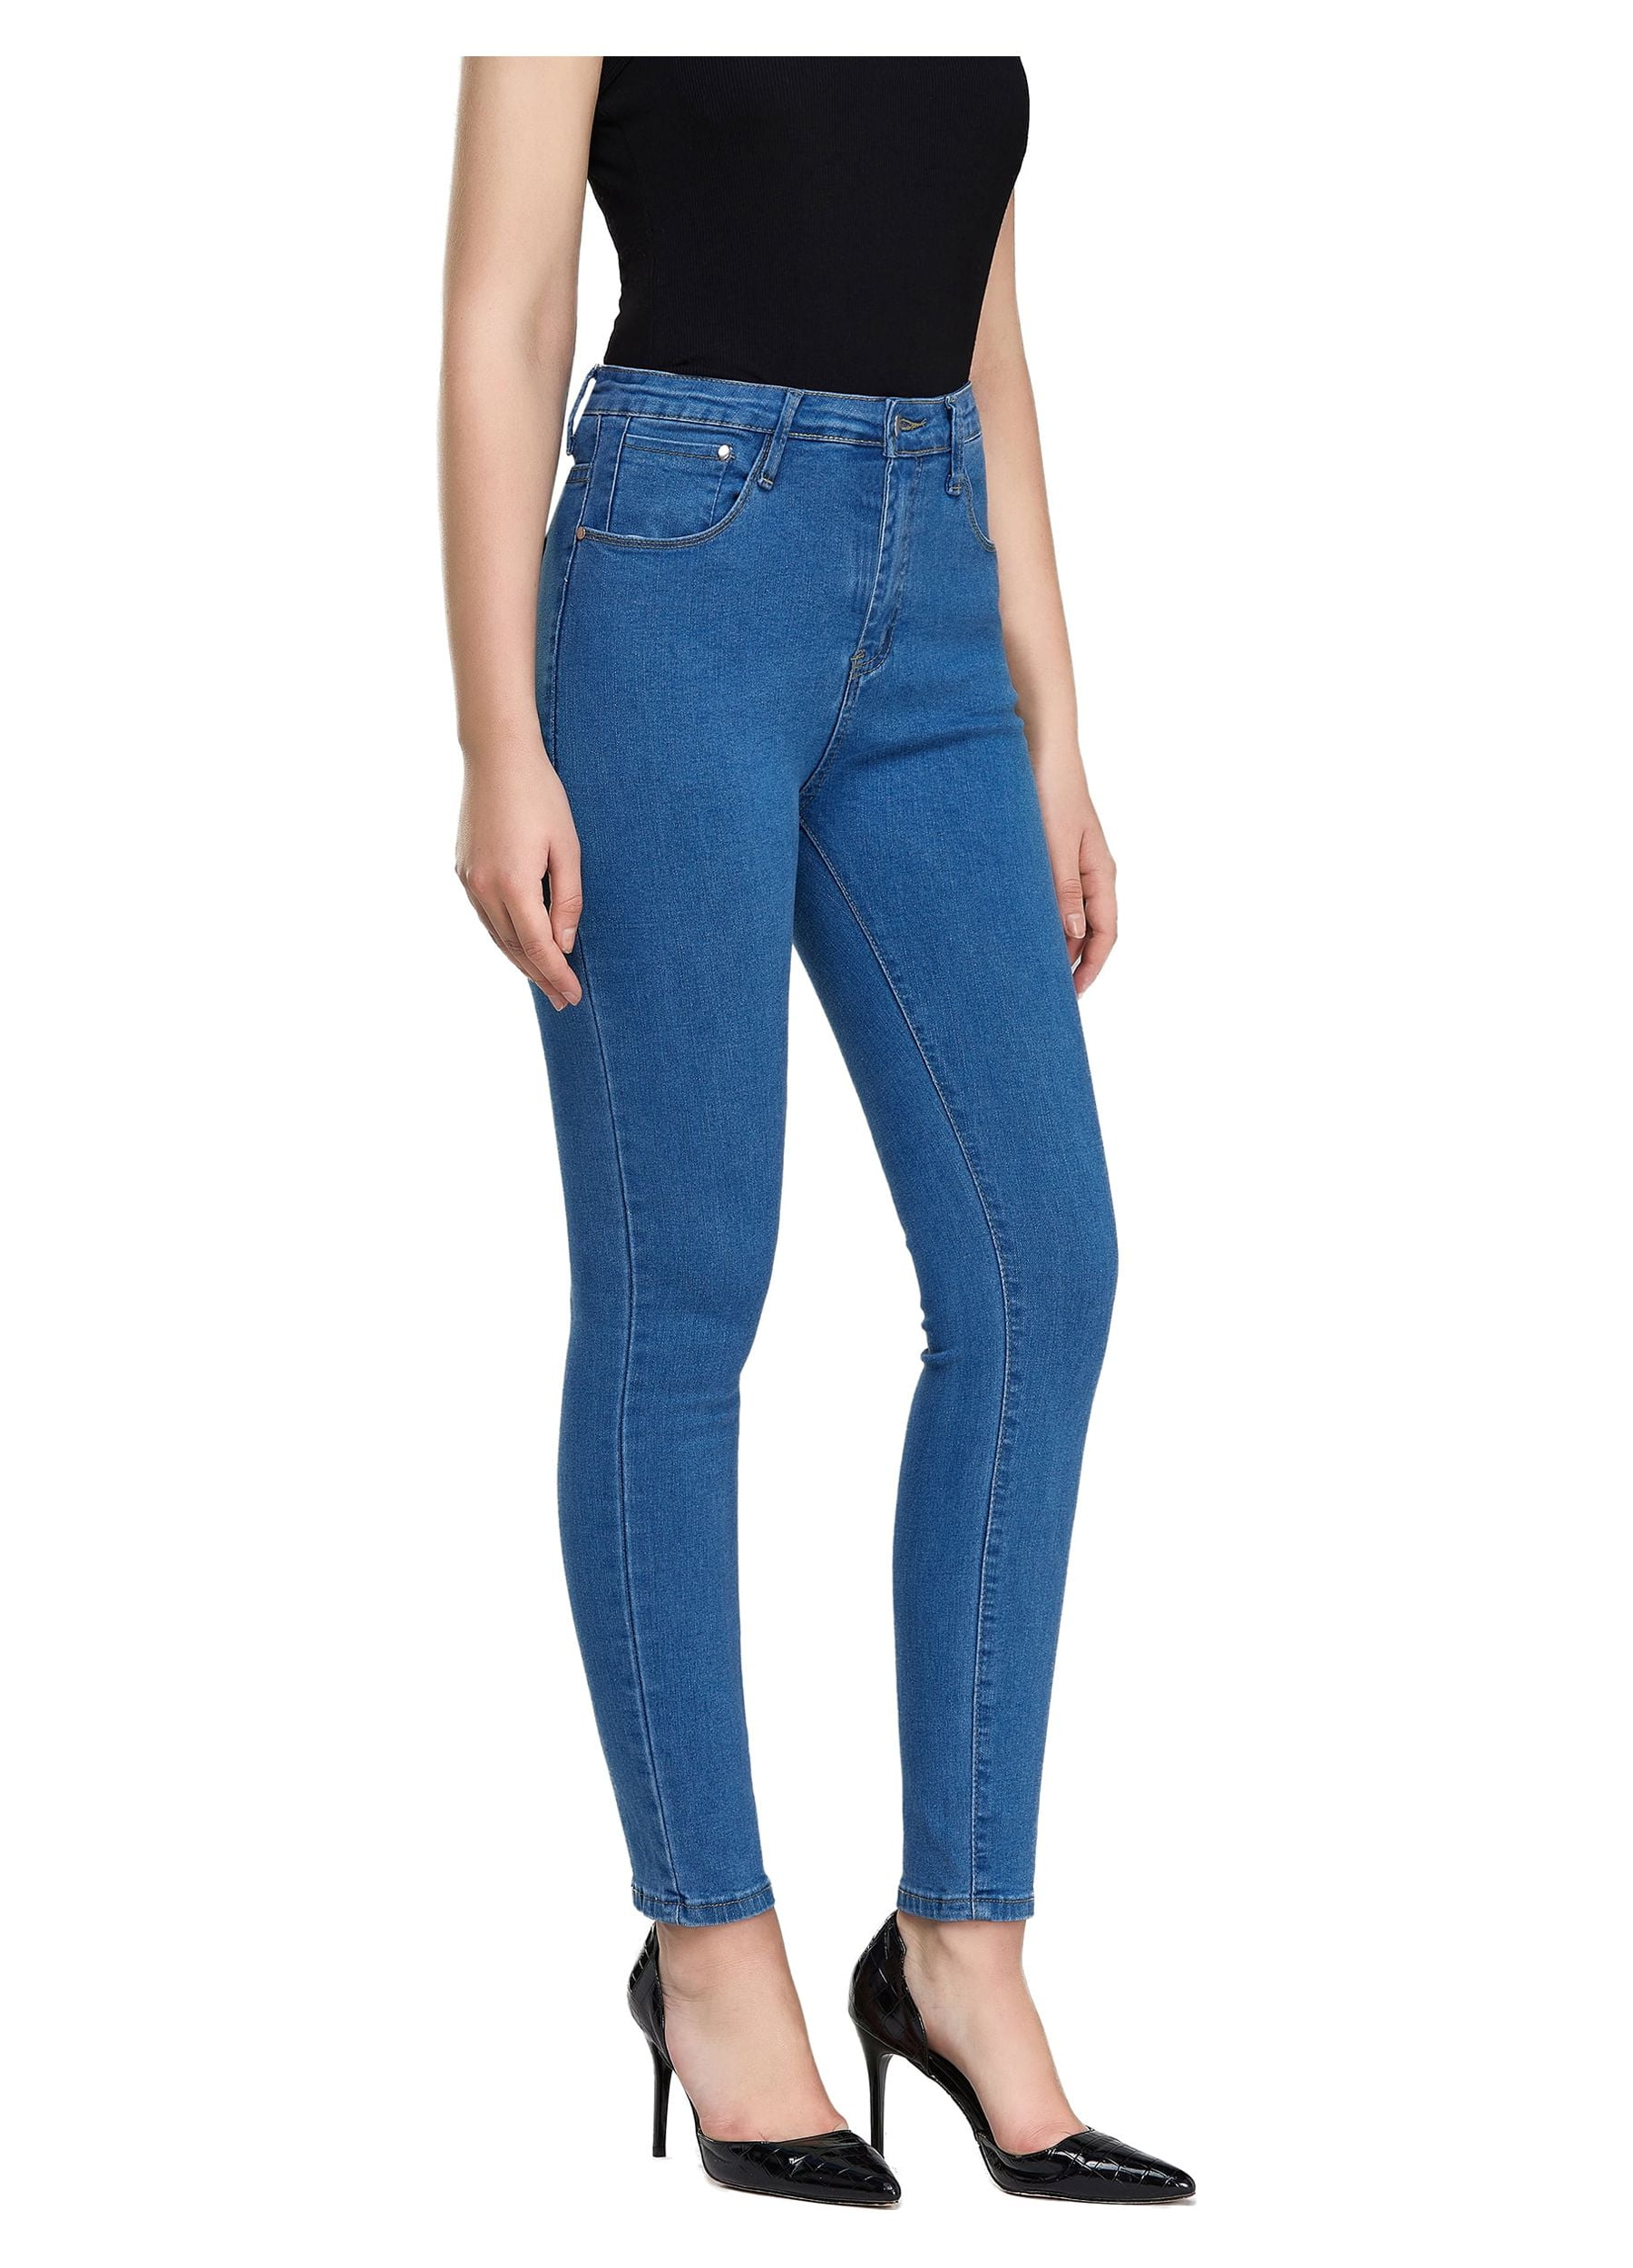 wax jean Women's High-Rise Push-Up Super Comfy 3-Button Skinny